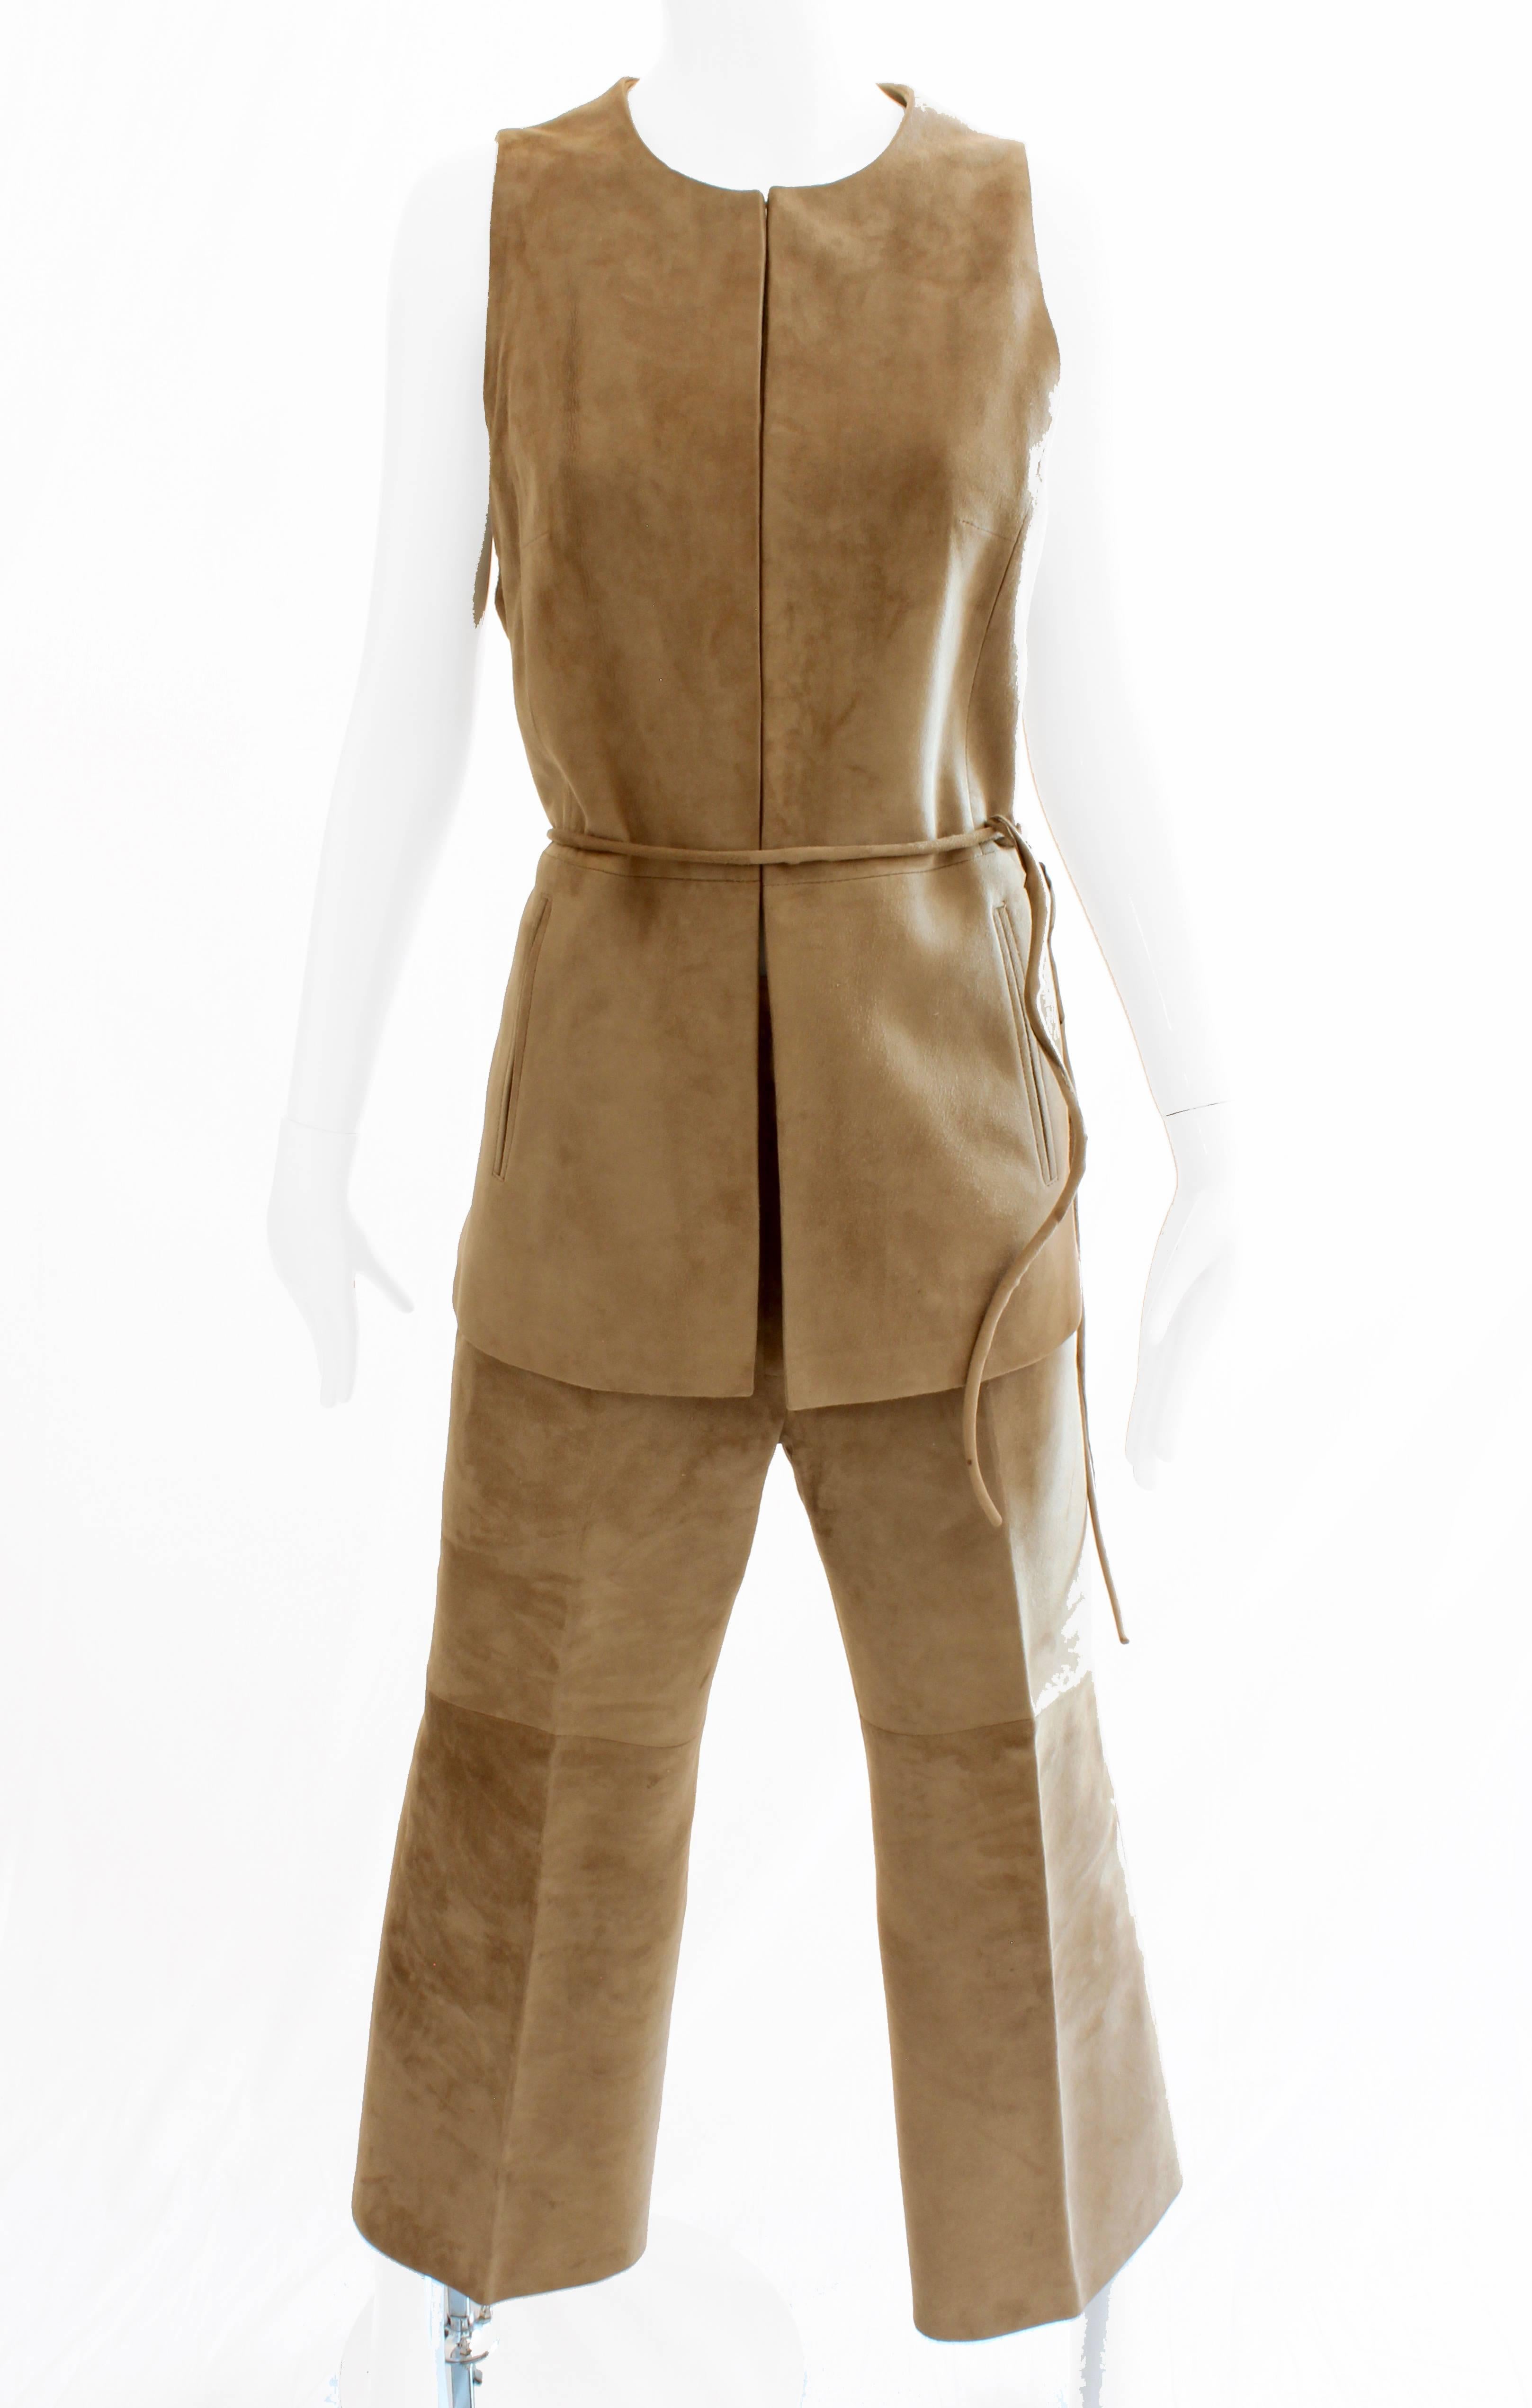 This three piece suede leather set was made by LOEWE MADRID, founded in 1846 and known for their quality leather goods.  This set includes a long suede vest, which fastens with hook/eye closures, a pair of cropped suede pants and a rope-style sueded